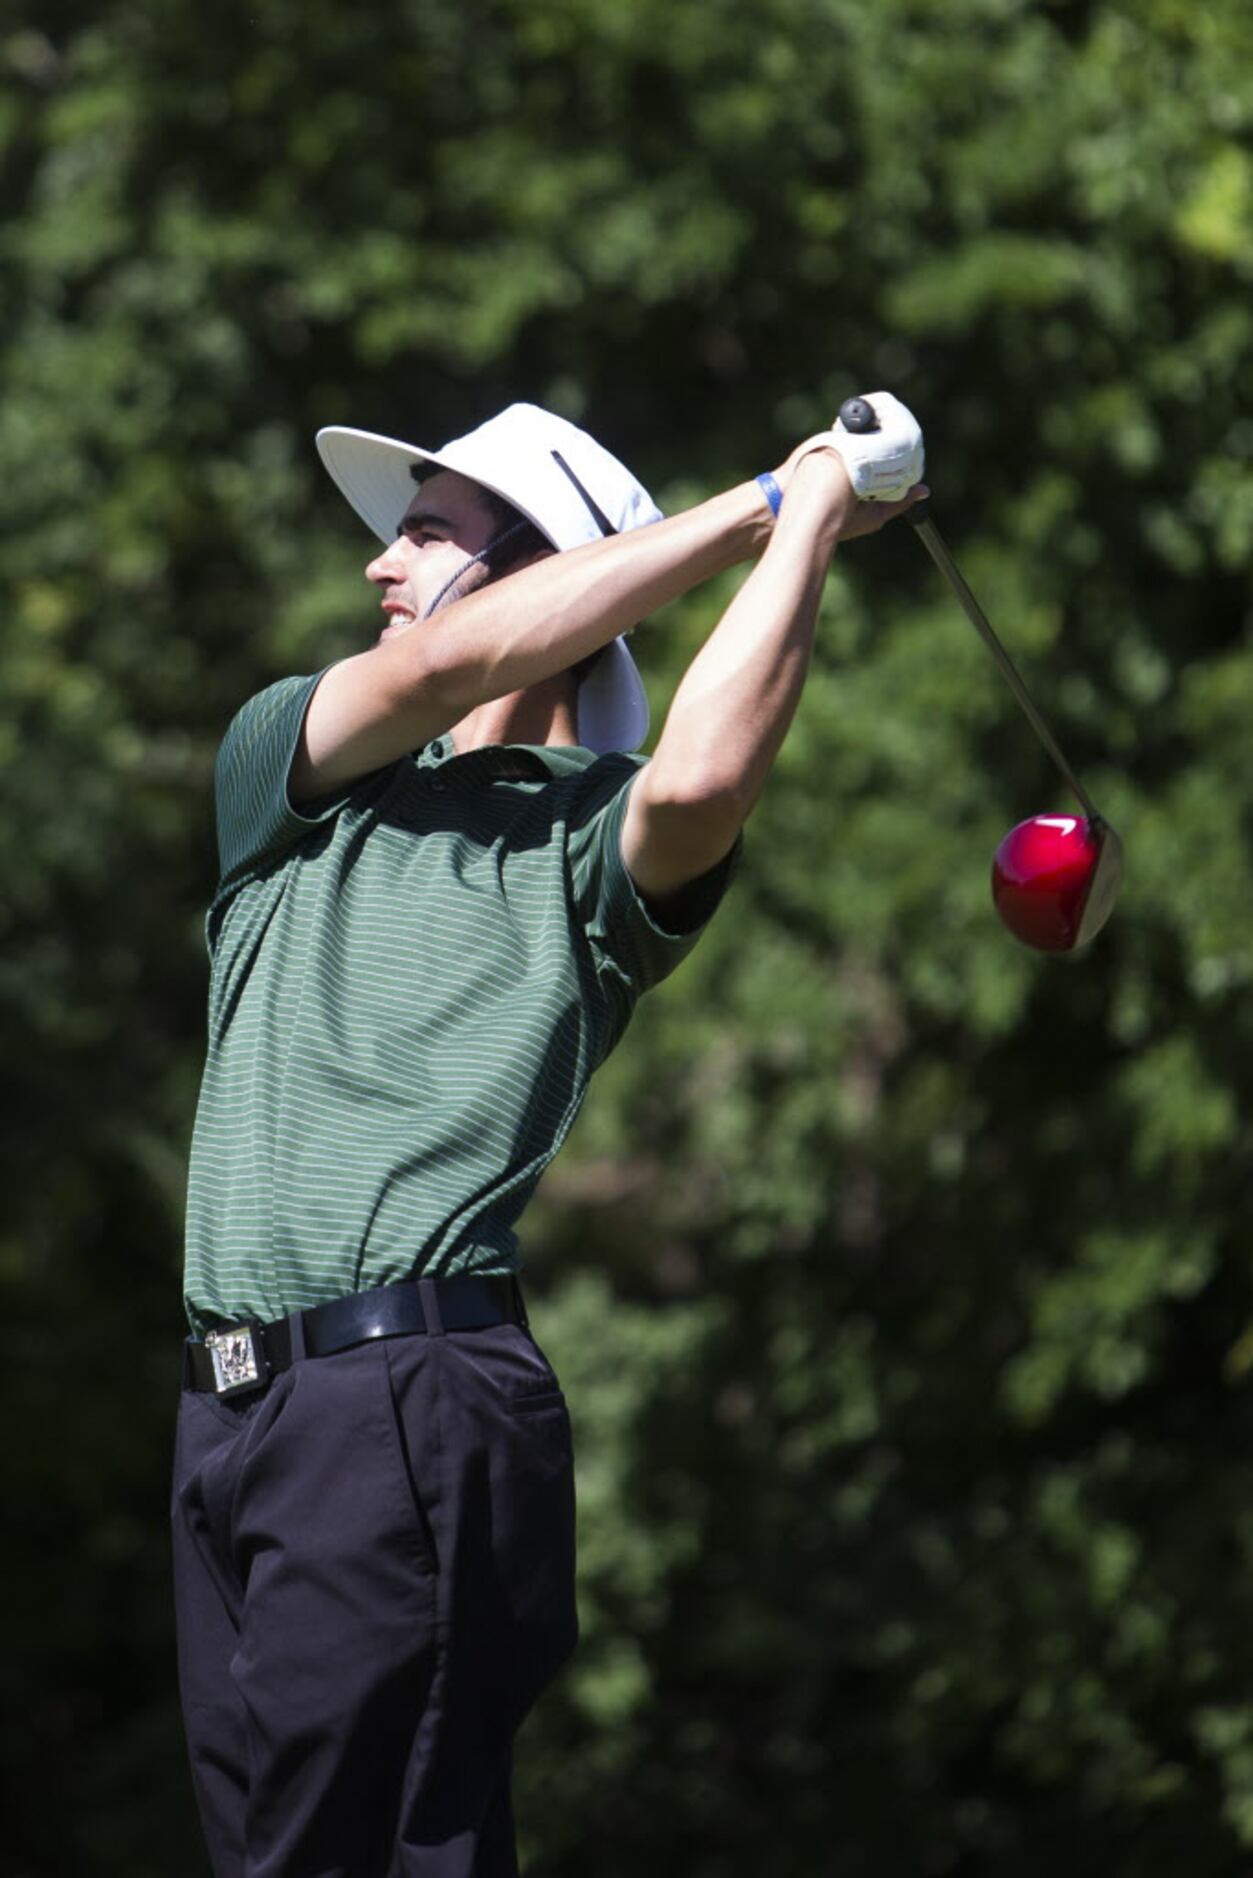 Southlake Carroll junior Trent Hill makes a drive on the sixth hole during the UIL 5A State...